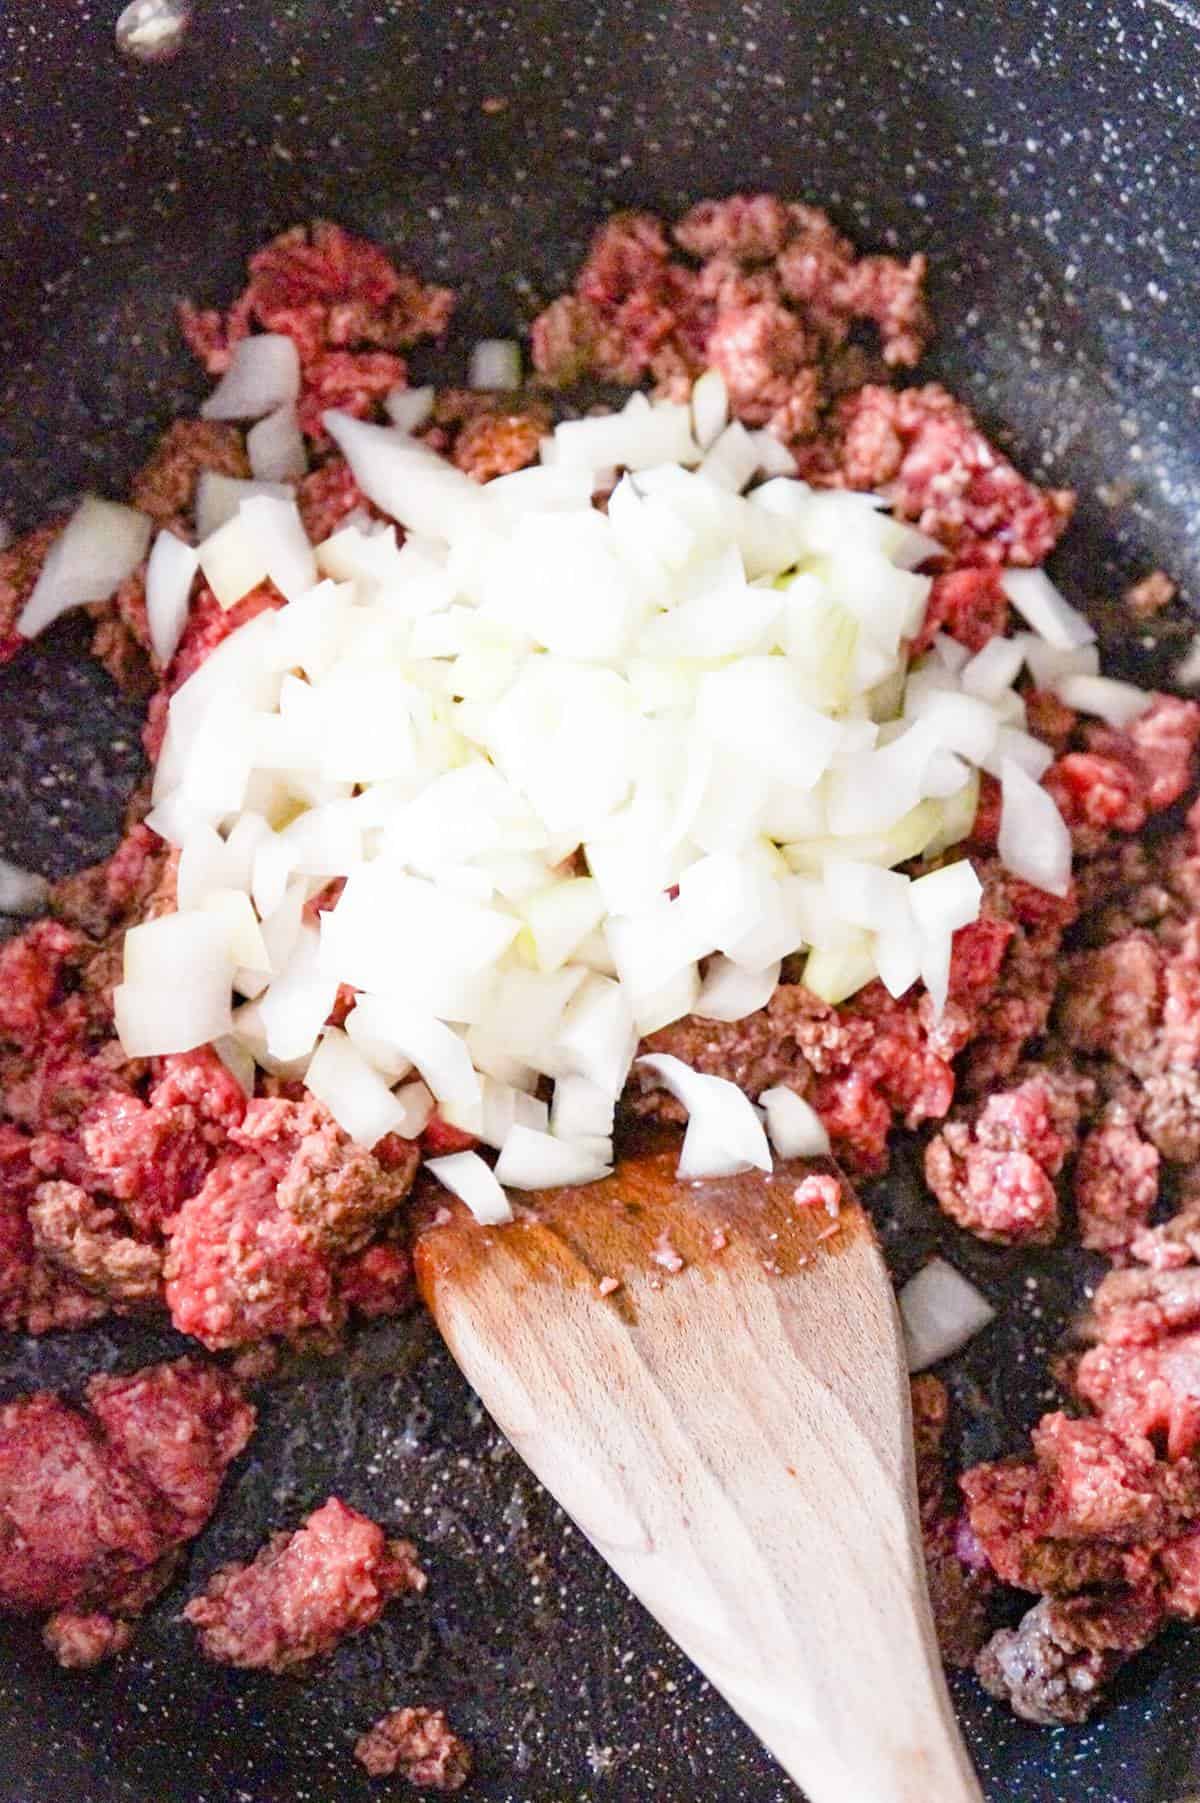 diced onions on top of ground beef in a saute pan